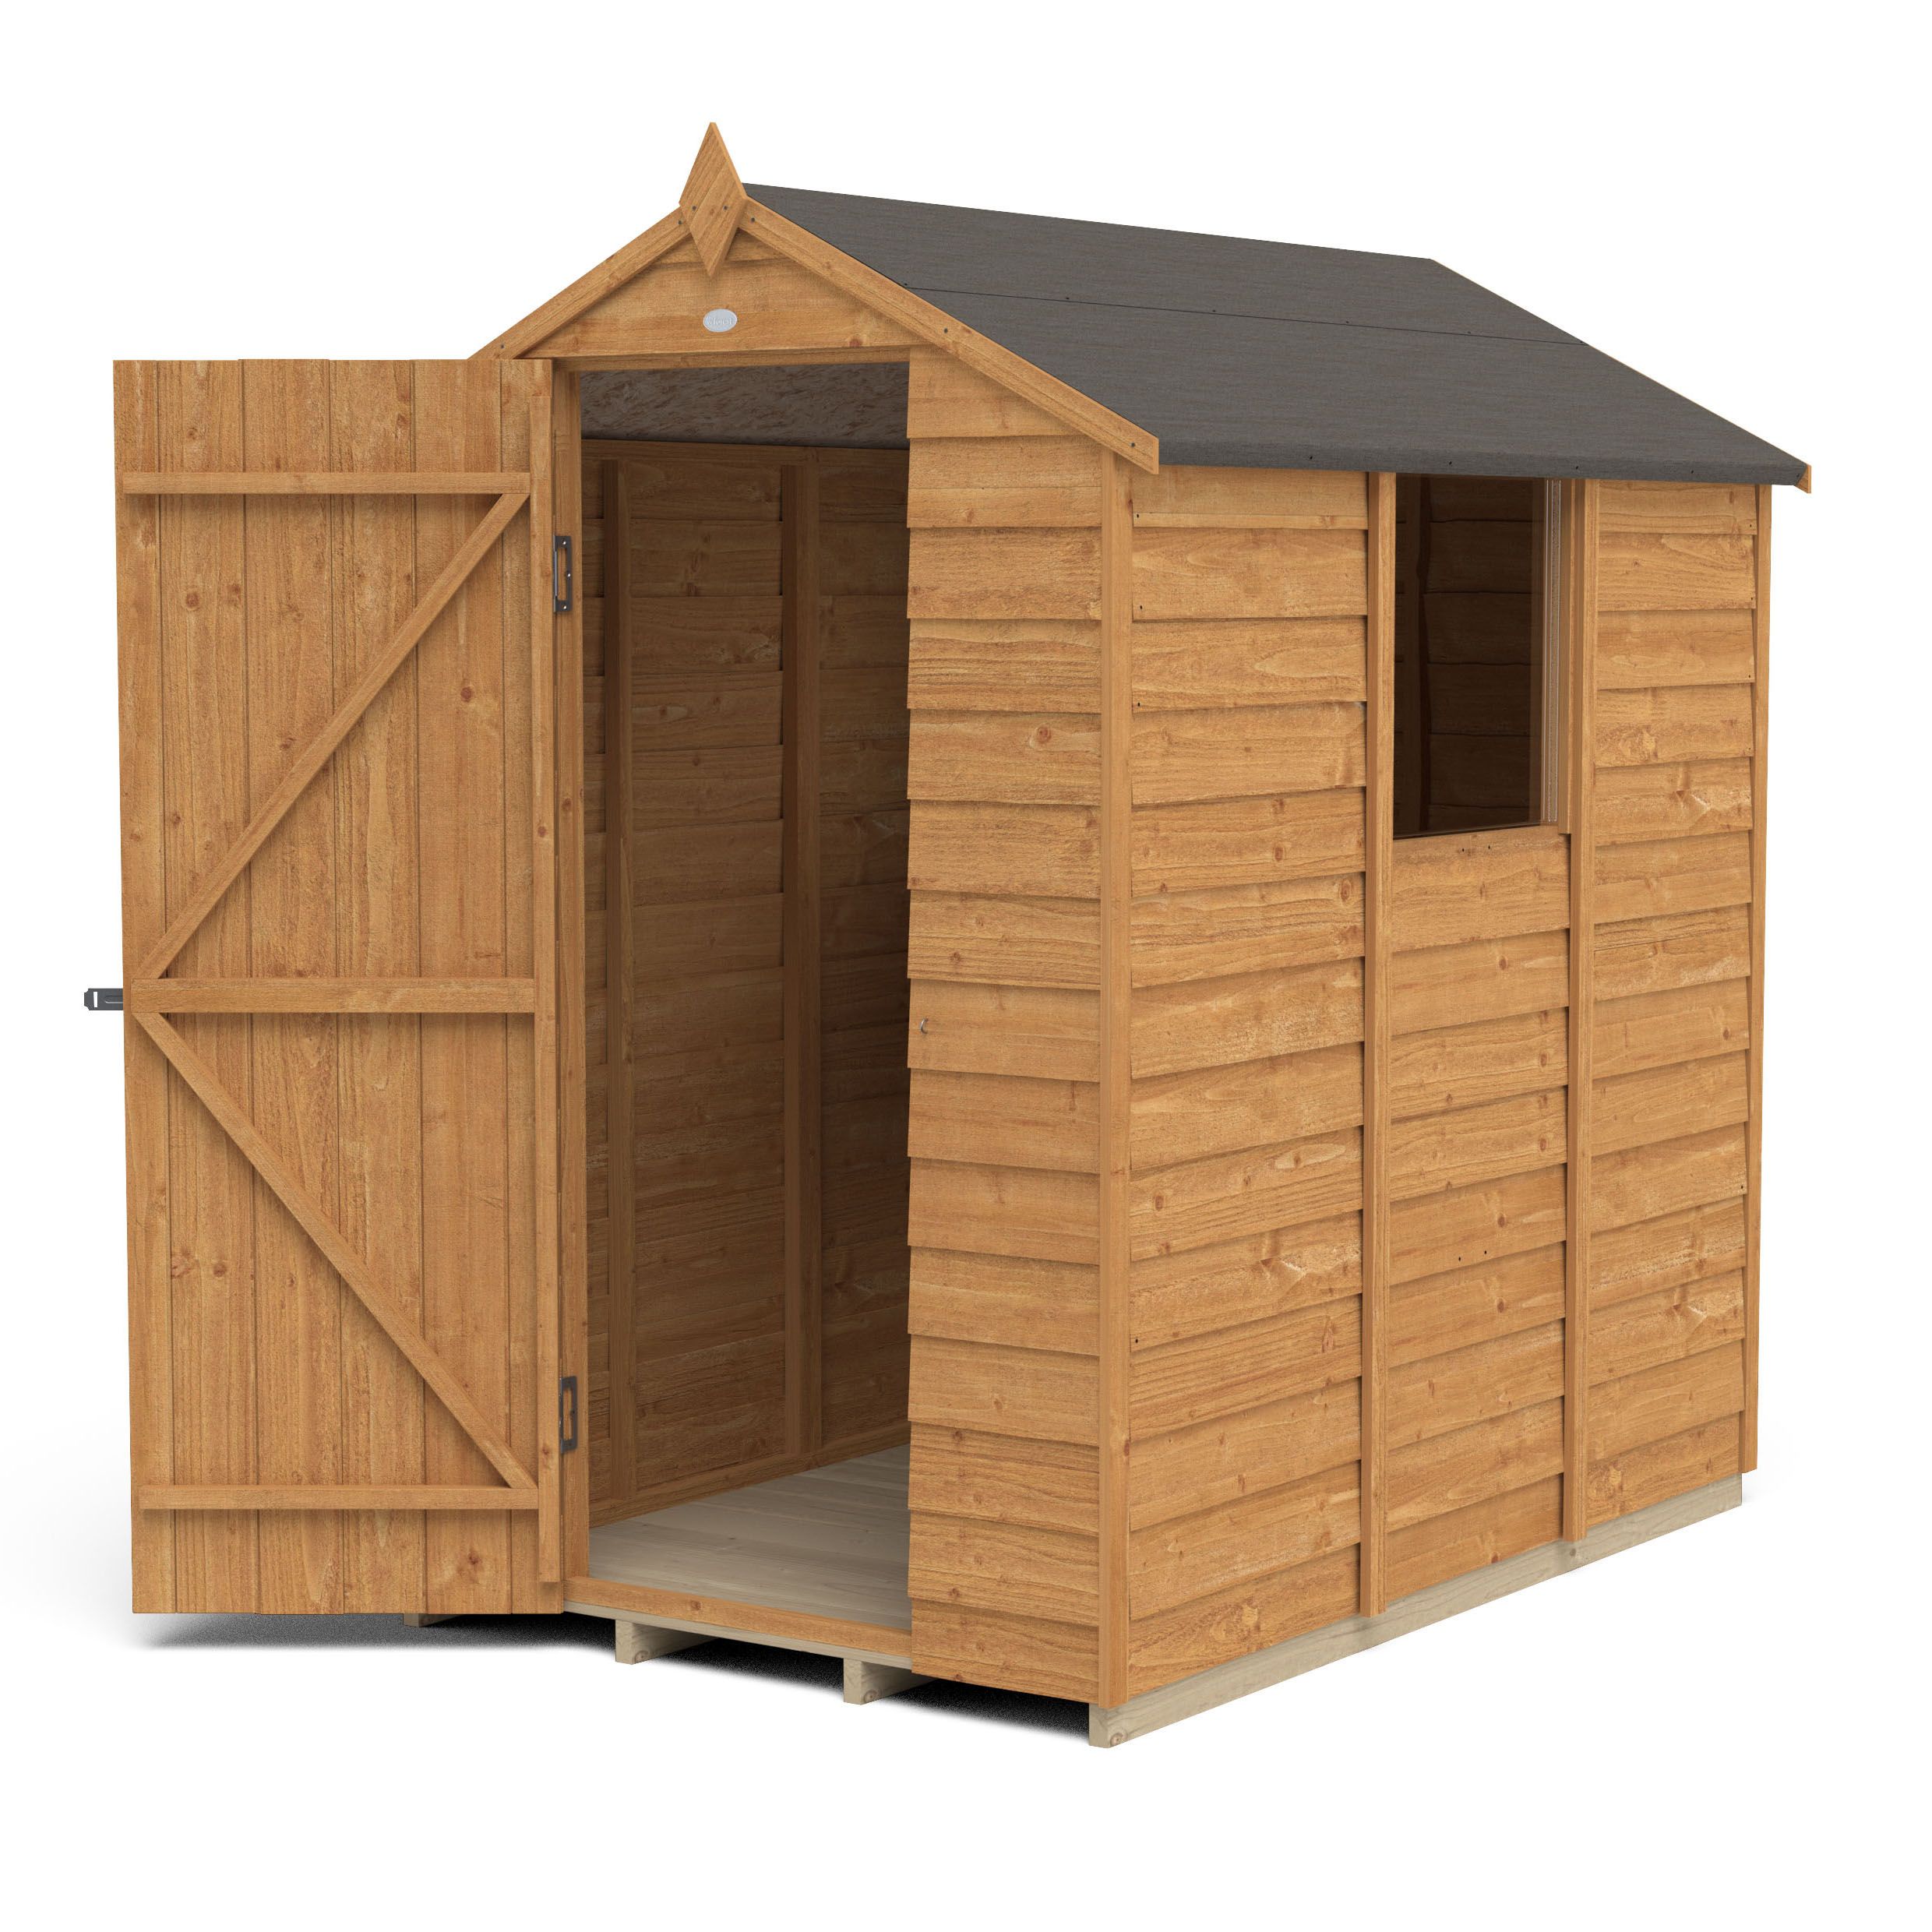 Forest Garden Overlap 6x4 ft Apex Wooden Dip treated Shed with floor & 1 window (Base included) - Assembly service included